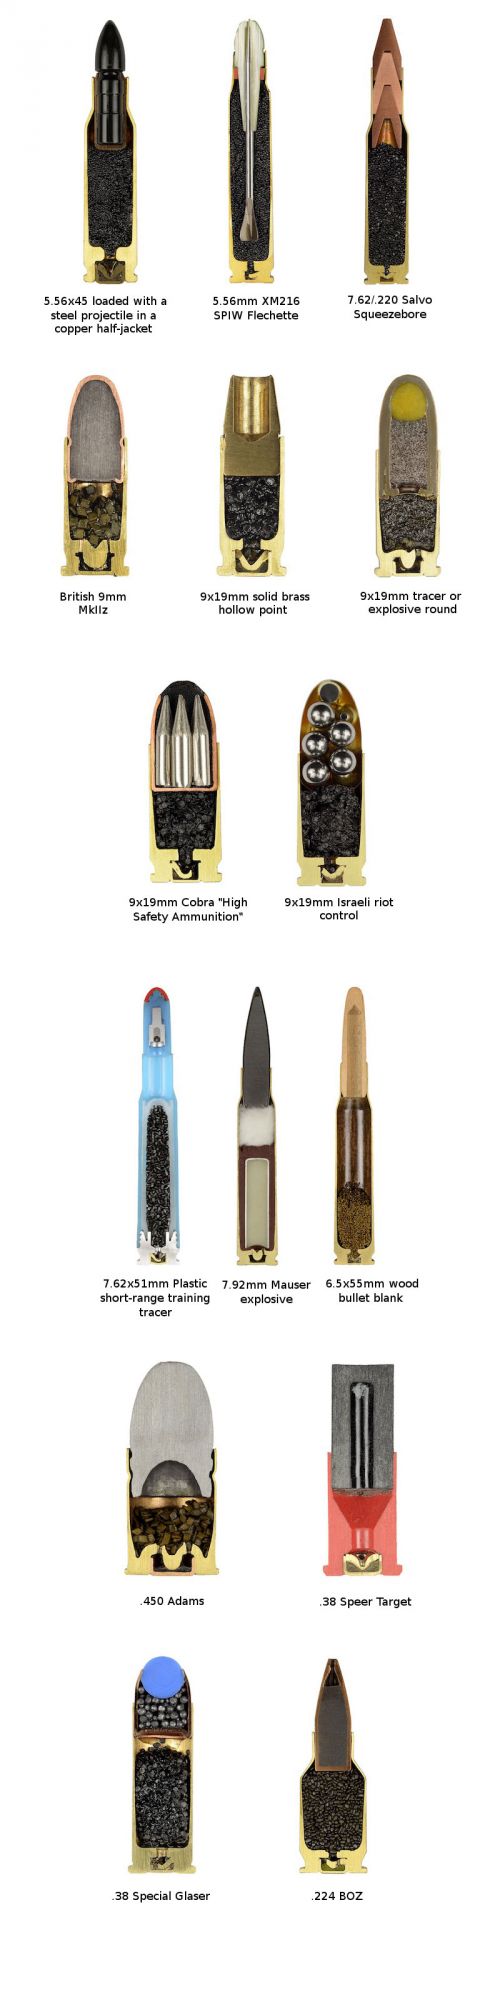 cross-sections-of-ammo-sabine-pearlman-7